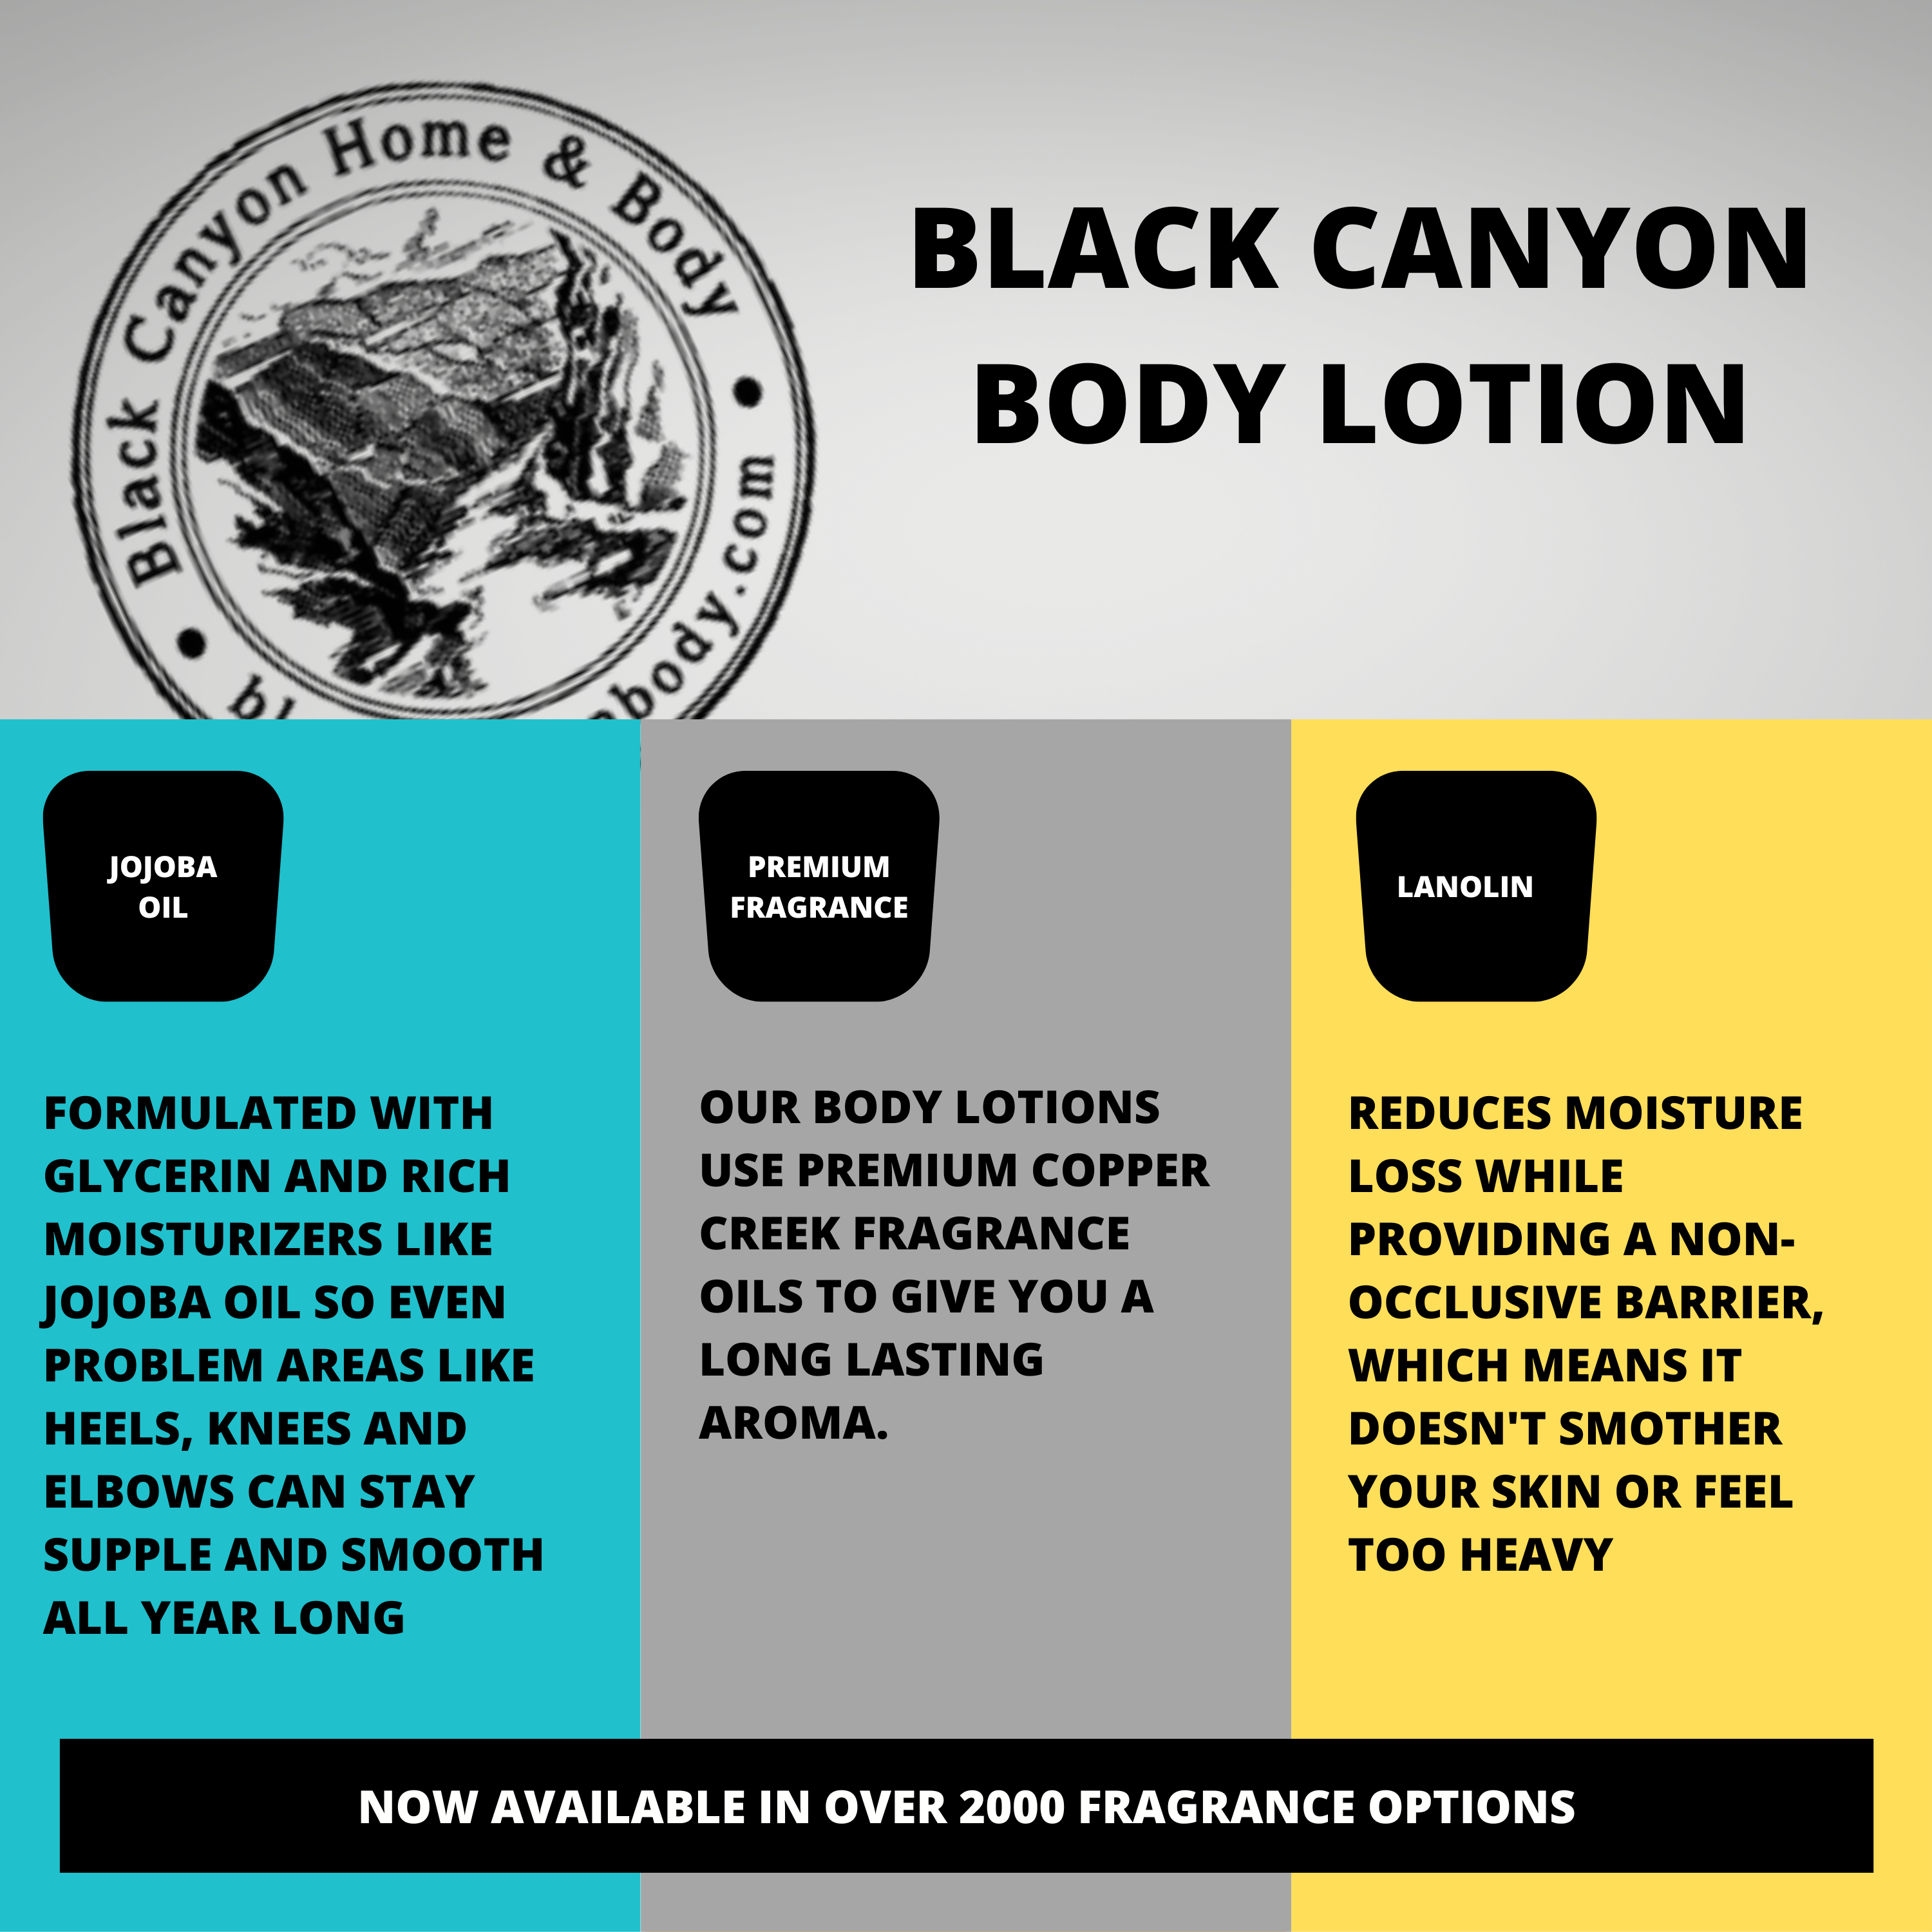 Black Canyon Black Currant & Cranberry Scented Luxury Body Lotion with Lanolin and Jojoba Oil